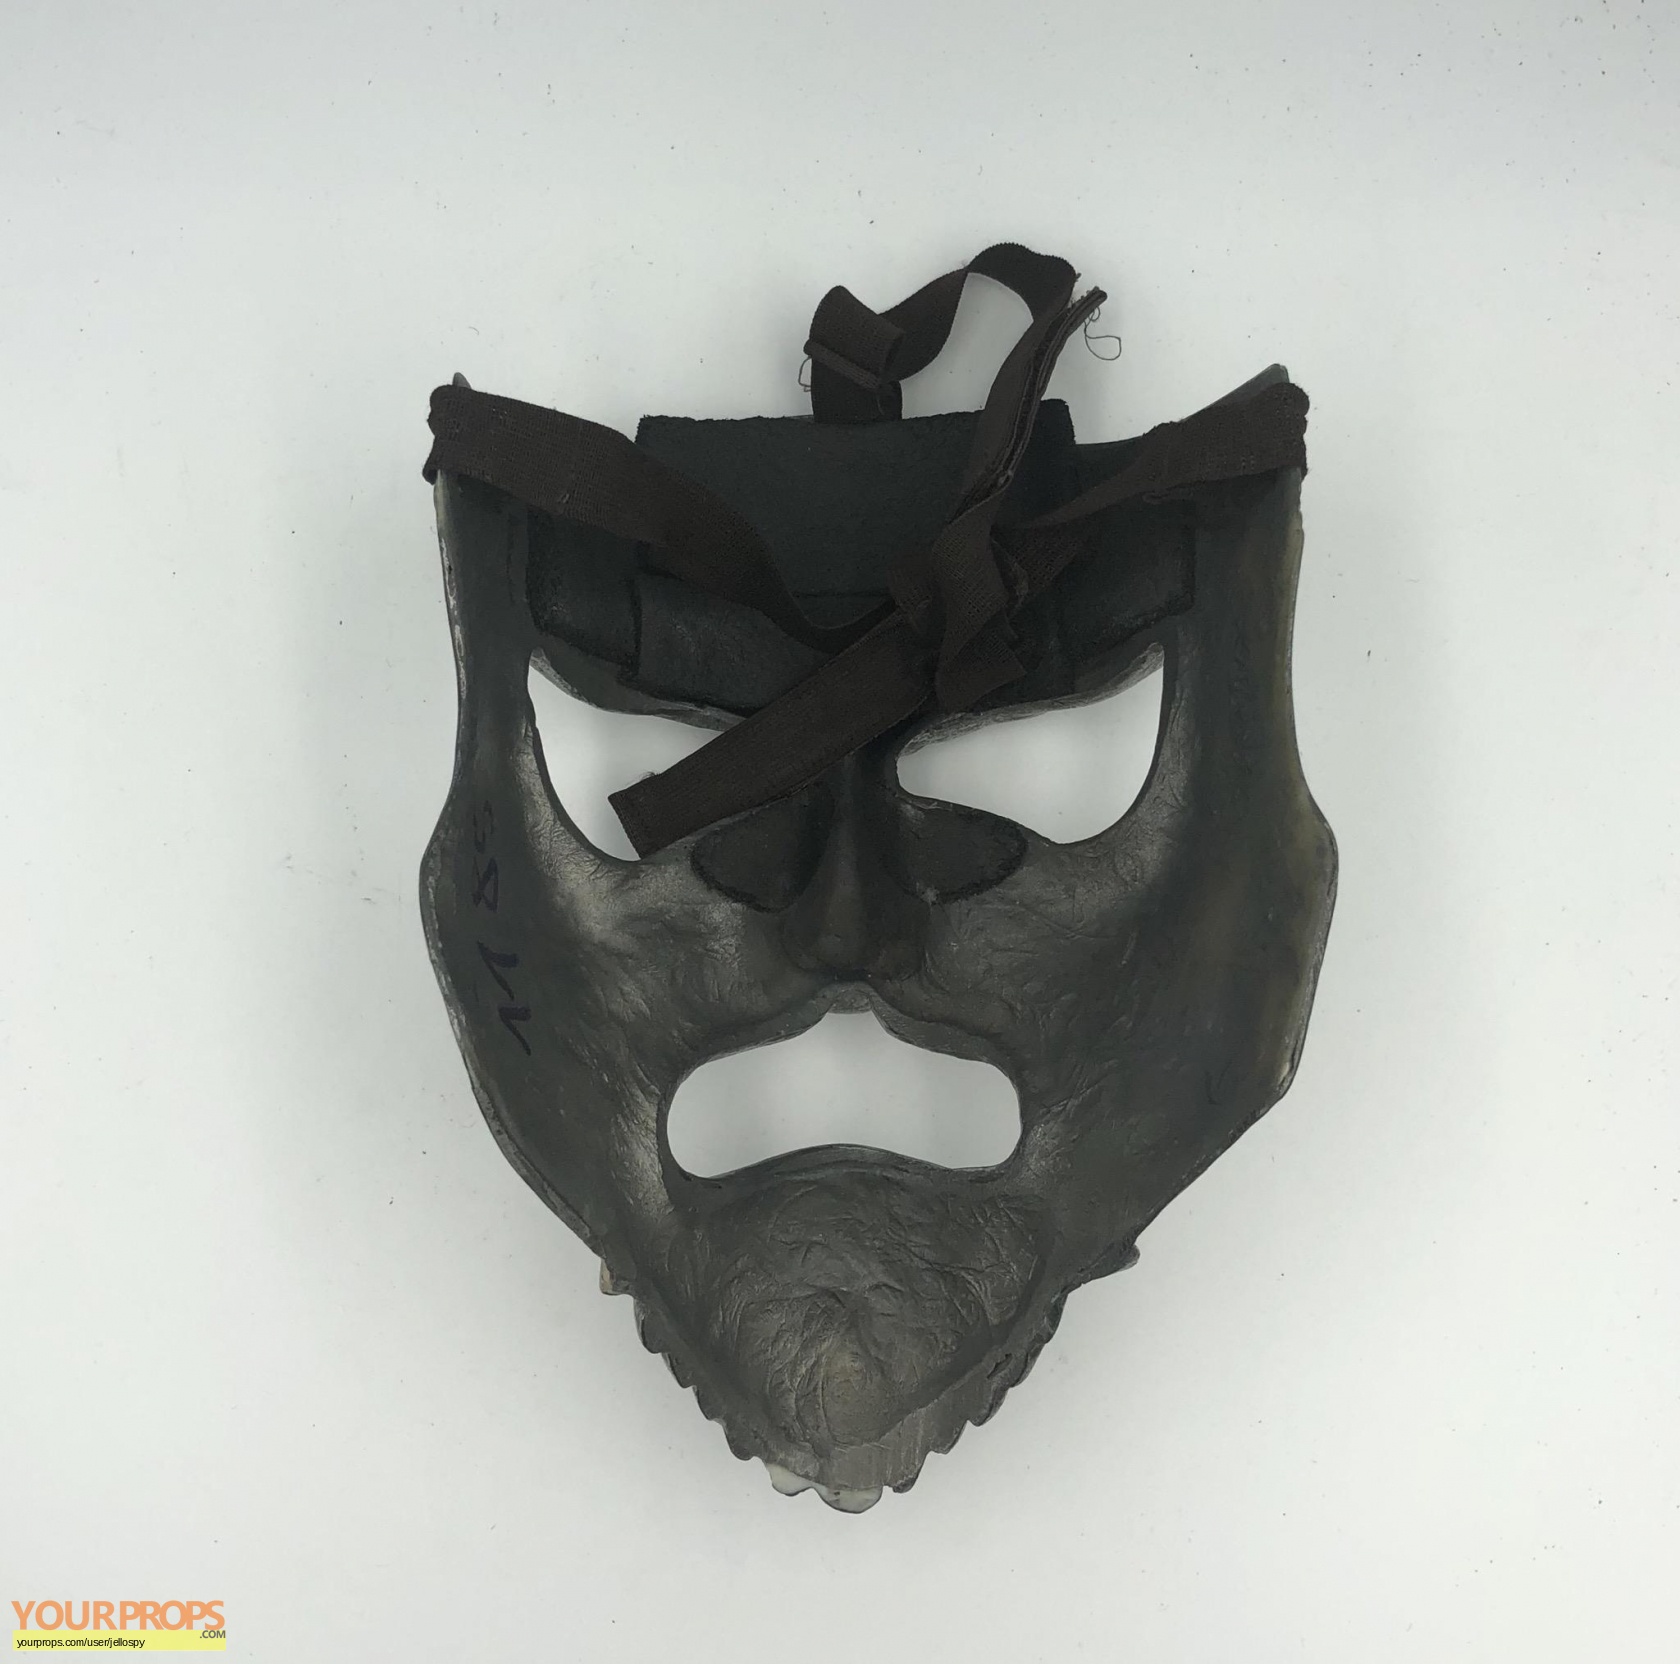 The Chronicles of Narnia: Prince Caspian Telmarine Soldiers mask ...